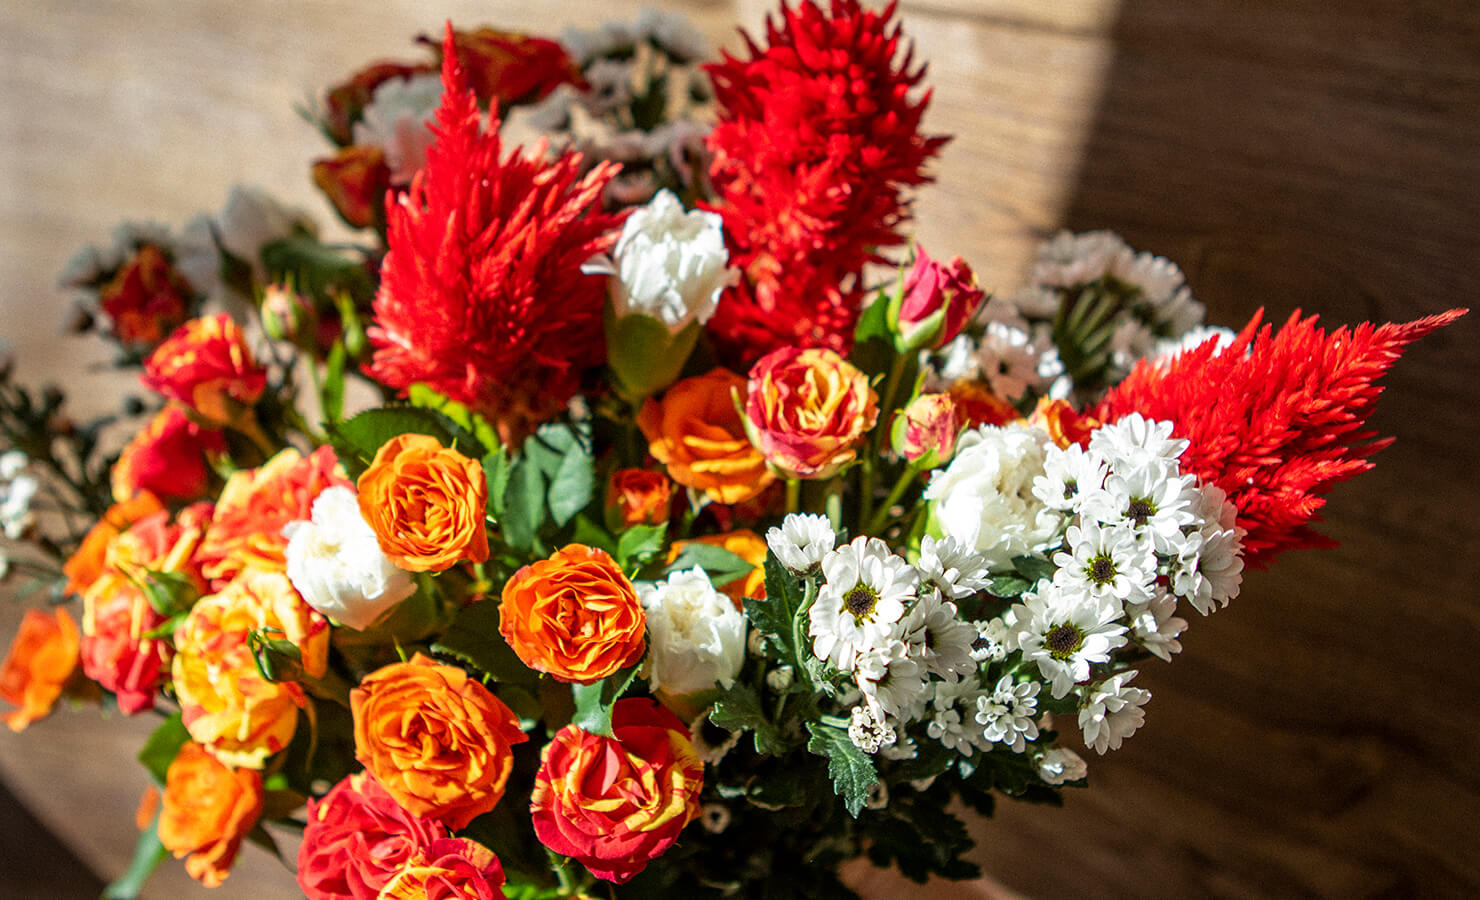 How to care for fresh flowers